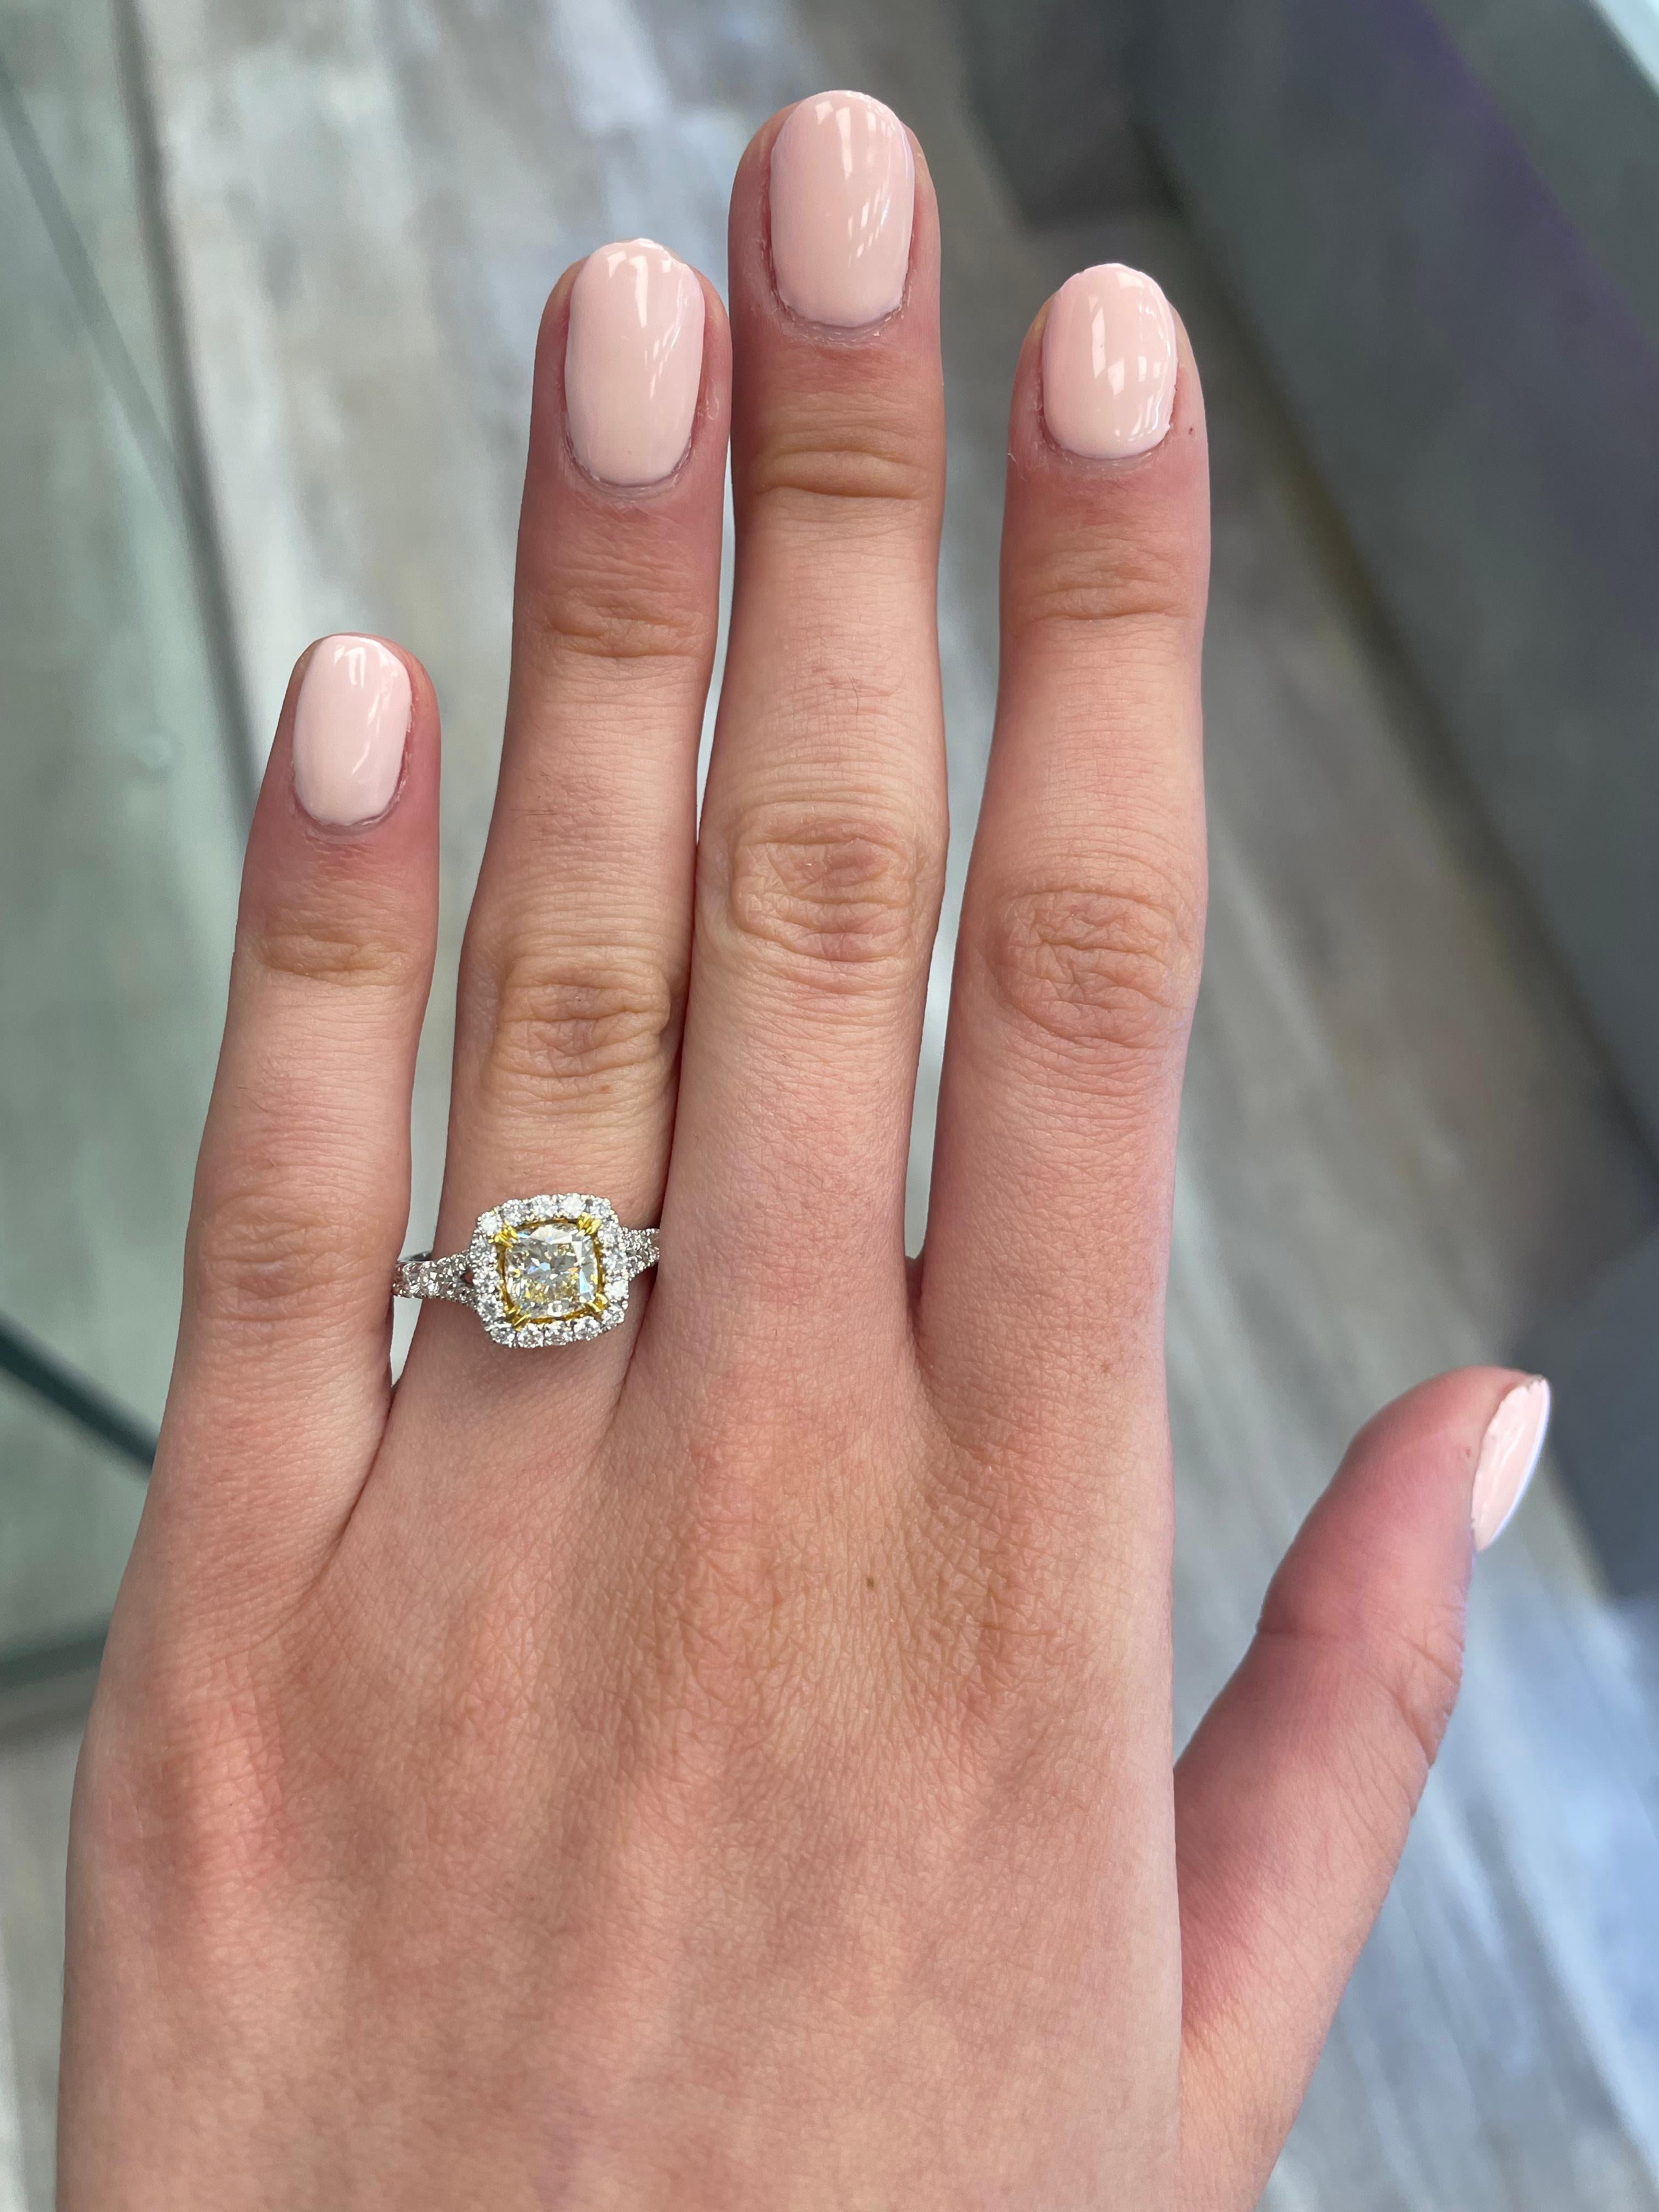 Stunning modern EGL certified yellow diamond with halo ring, two-tone 18k yellow and white gold. By Alexander Beverly Hills
1.63 carats total diamond weight.
1.04 carat cushion cut Fancy Yellow color and VS1 clarity diamond, EGL graded. Complimented